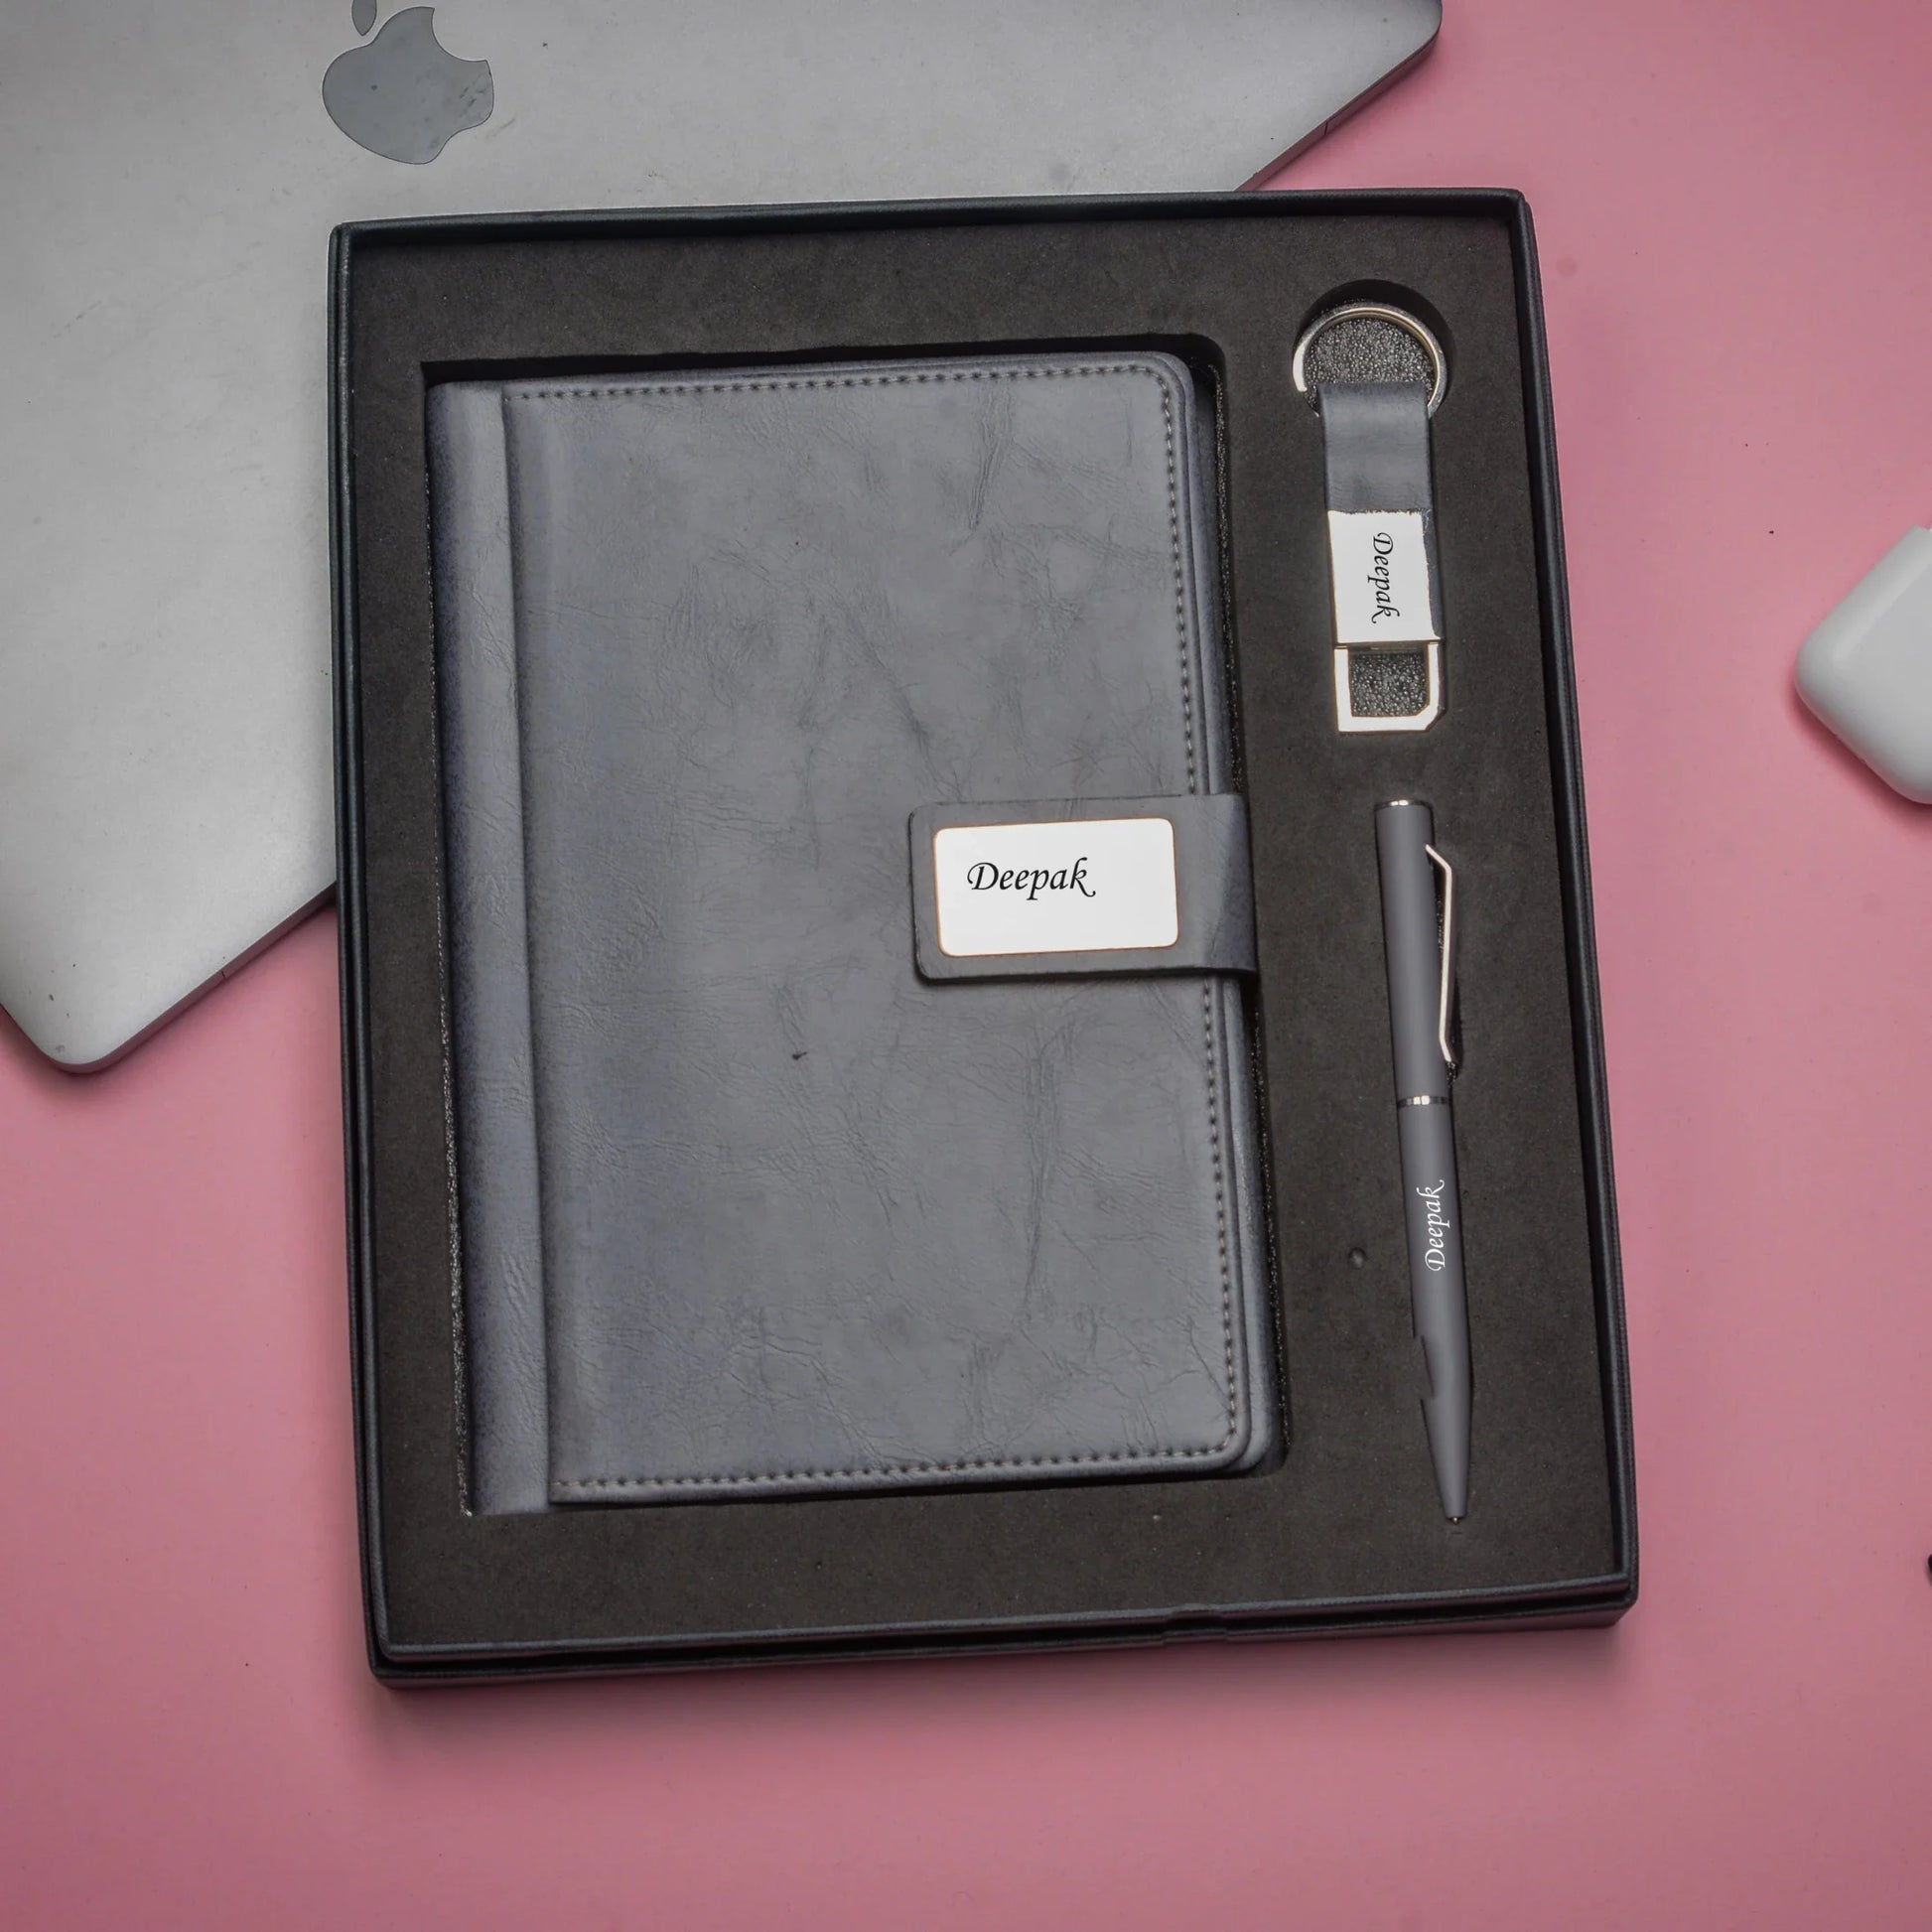 "Expand your horizons and explore your innermost thoughts with our introspective corporate duo. Our thought-provoking diary, precise pen, and reflective keychain will help you grow and evolve."